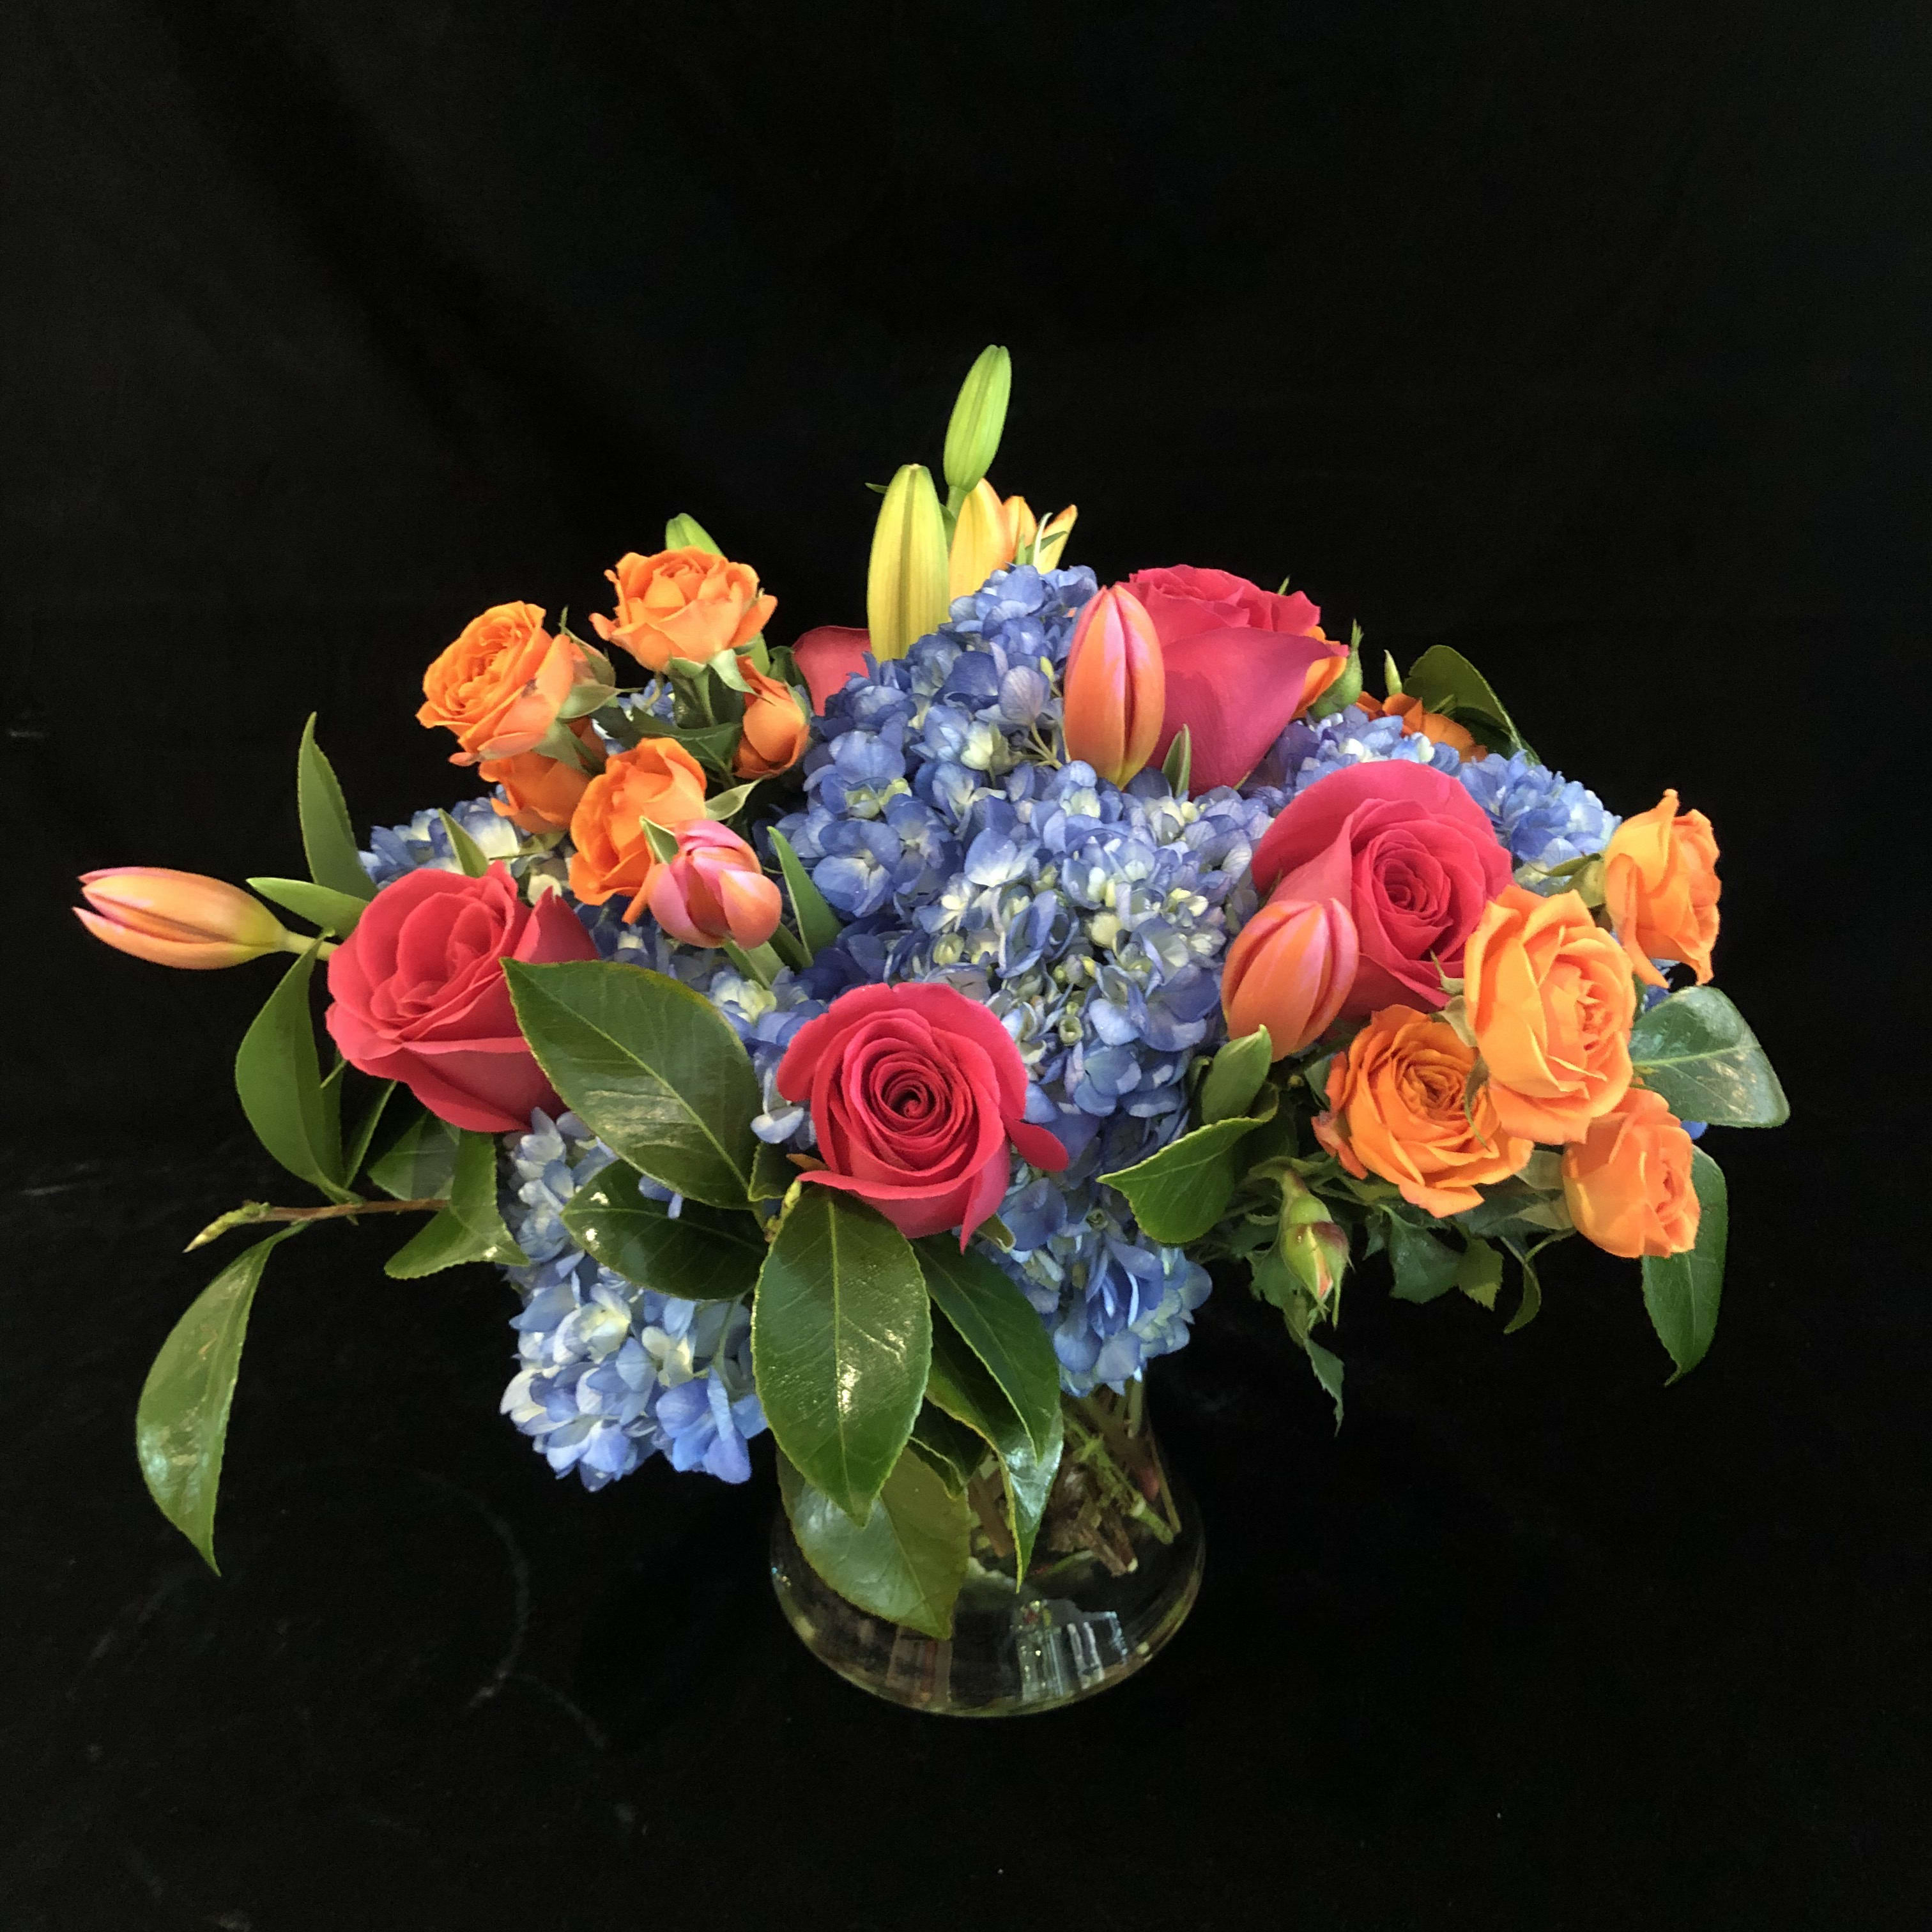 Bright Designers Choice - Bright, fun, cheerful flowers. Exact combinations may vary due to availability but we assure you a bright, fun combination of flowers.